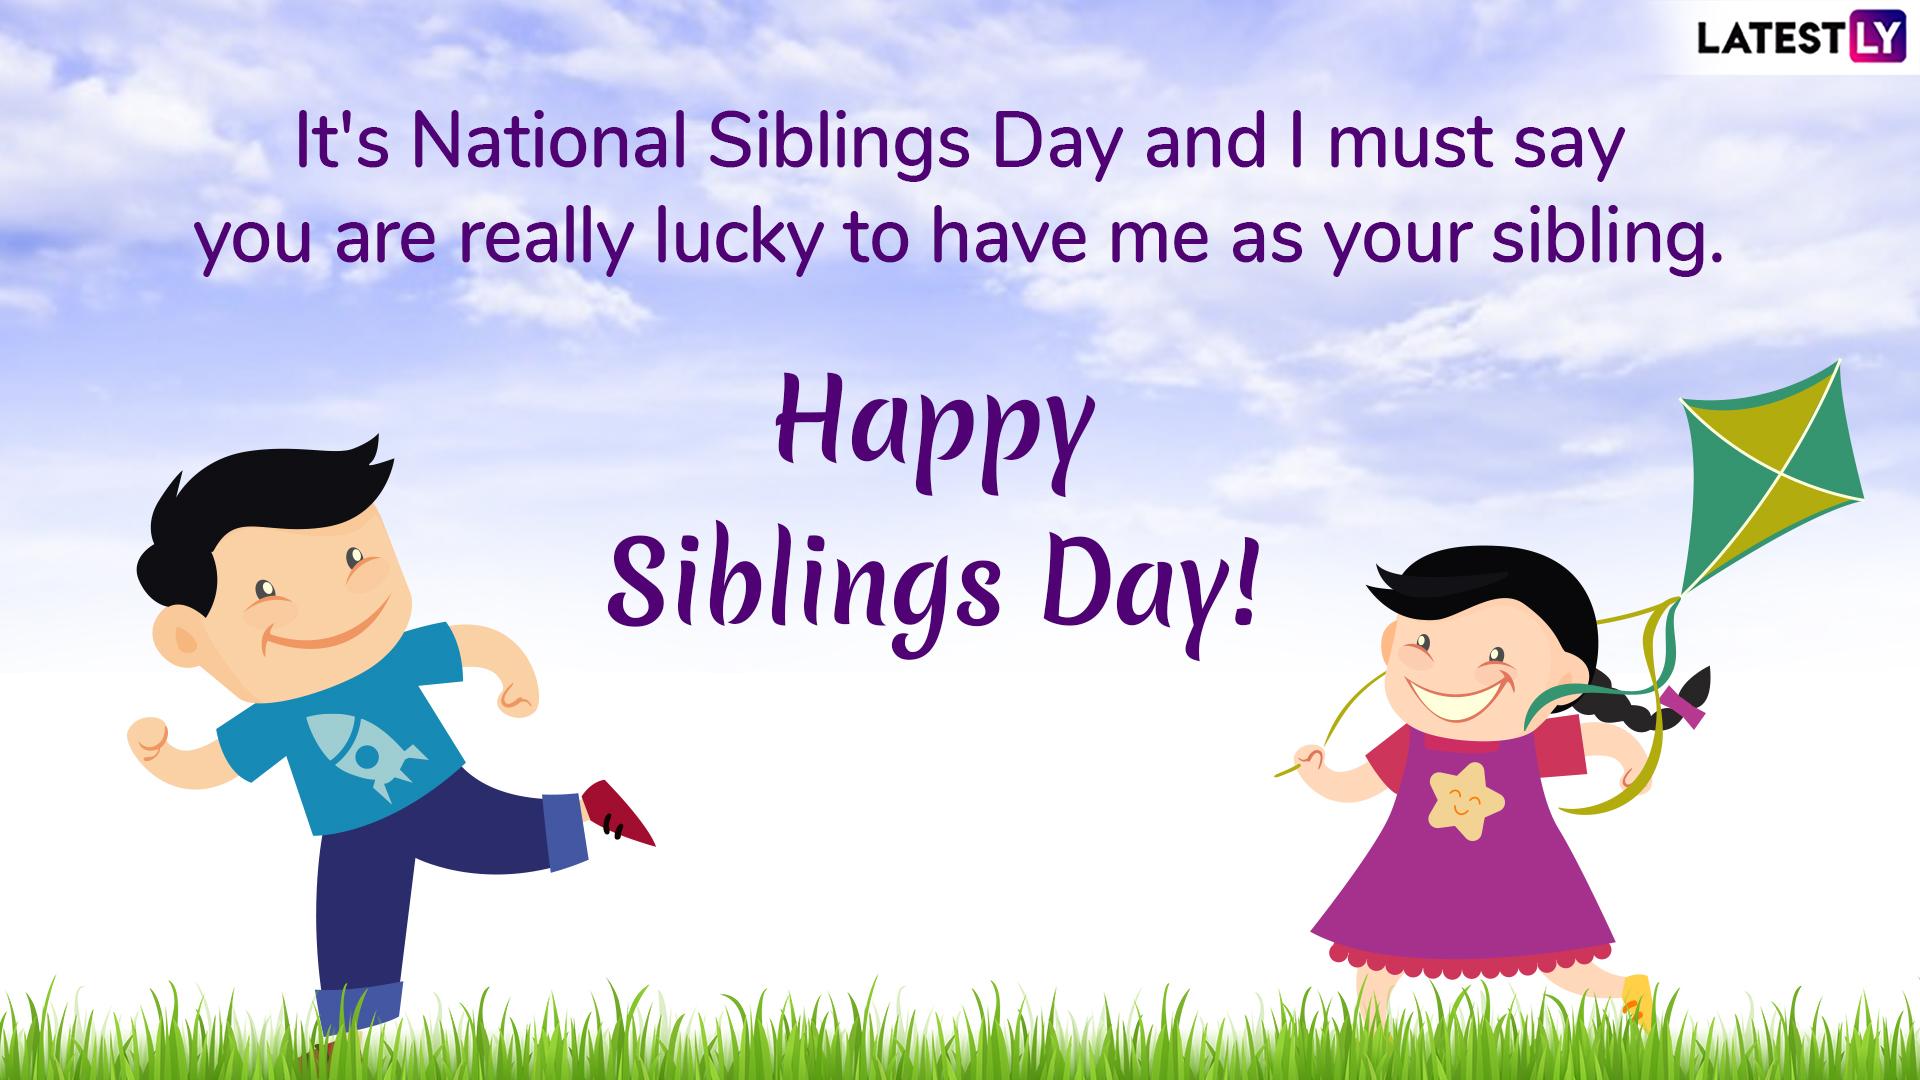 National Siblings Day 2019: Funny Quotes, GIF Image, and SMS